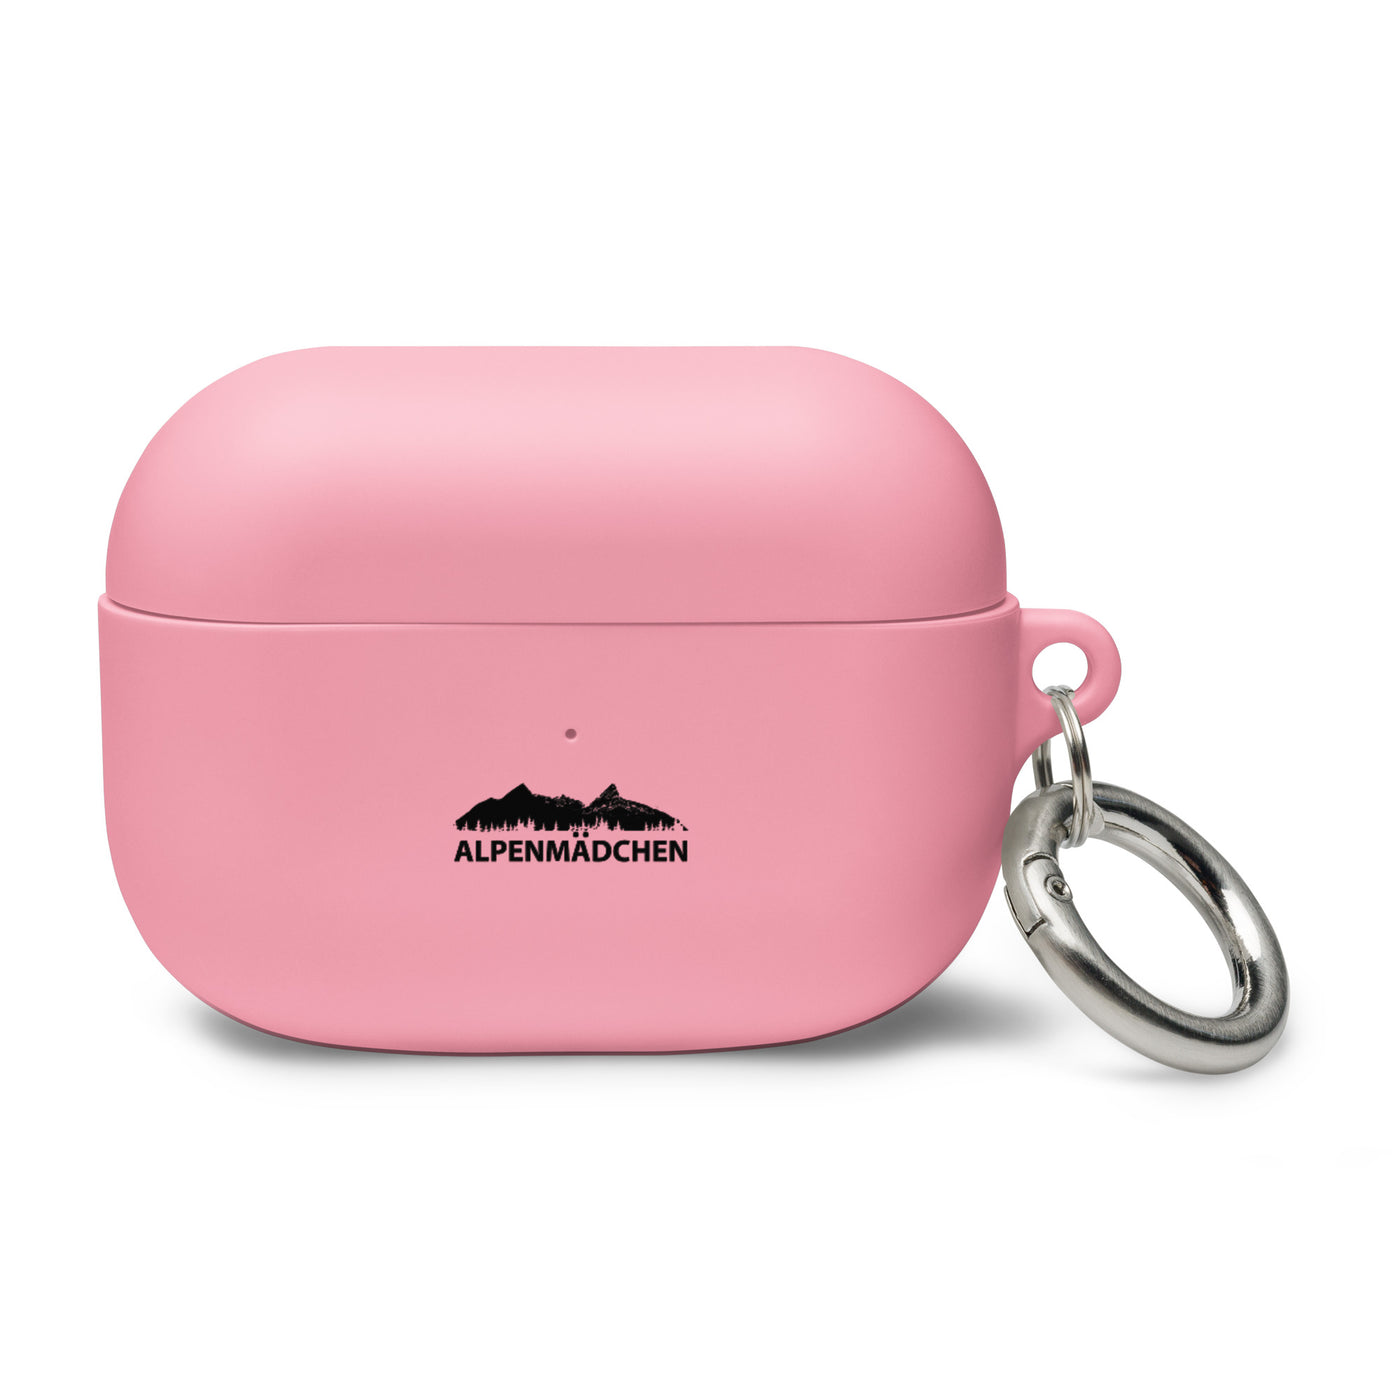 Alpenmadchen - AirPods Case berge Pink AirPods Pro